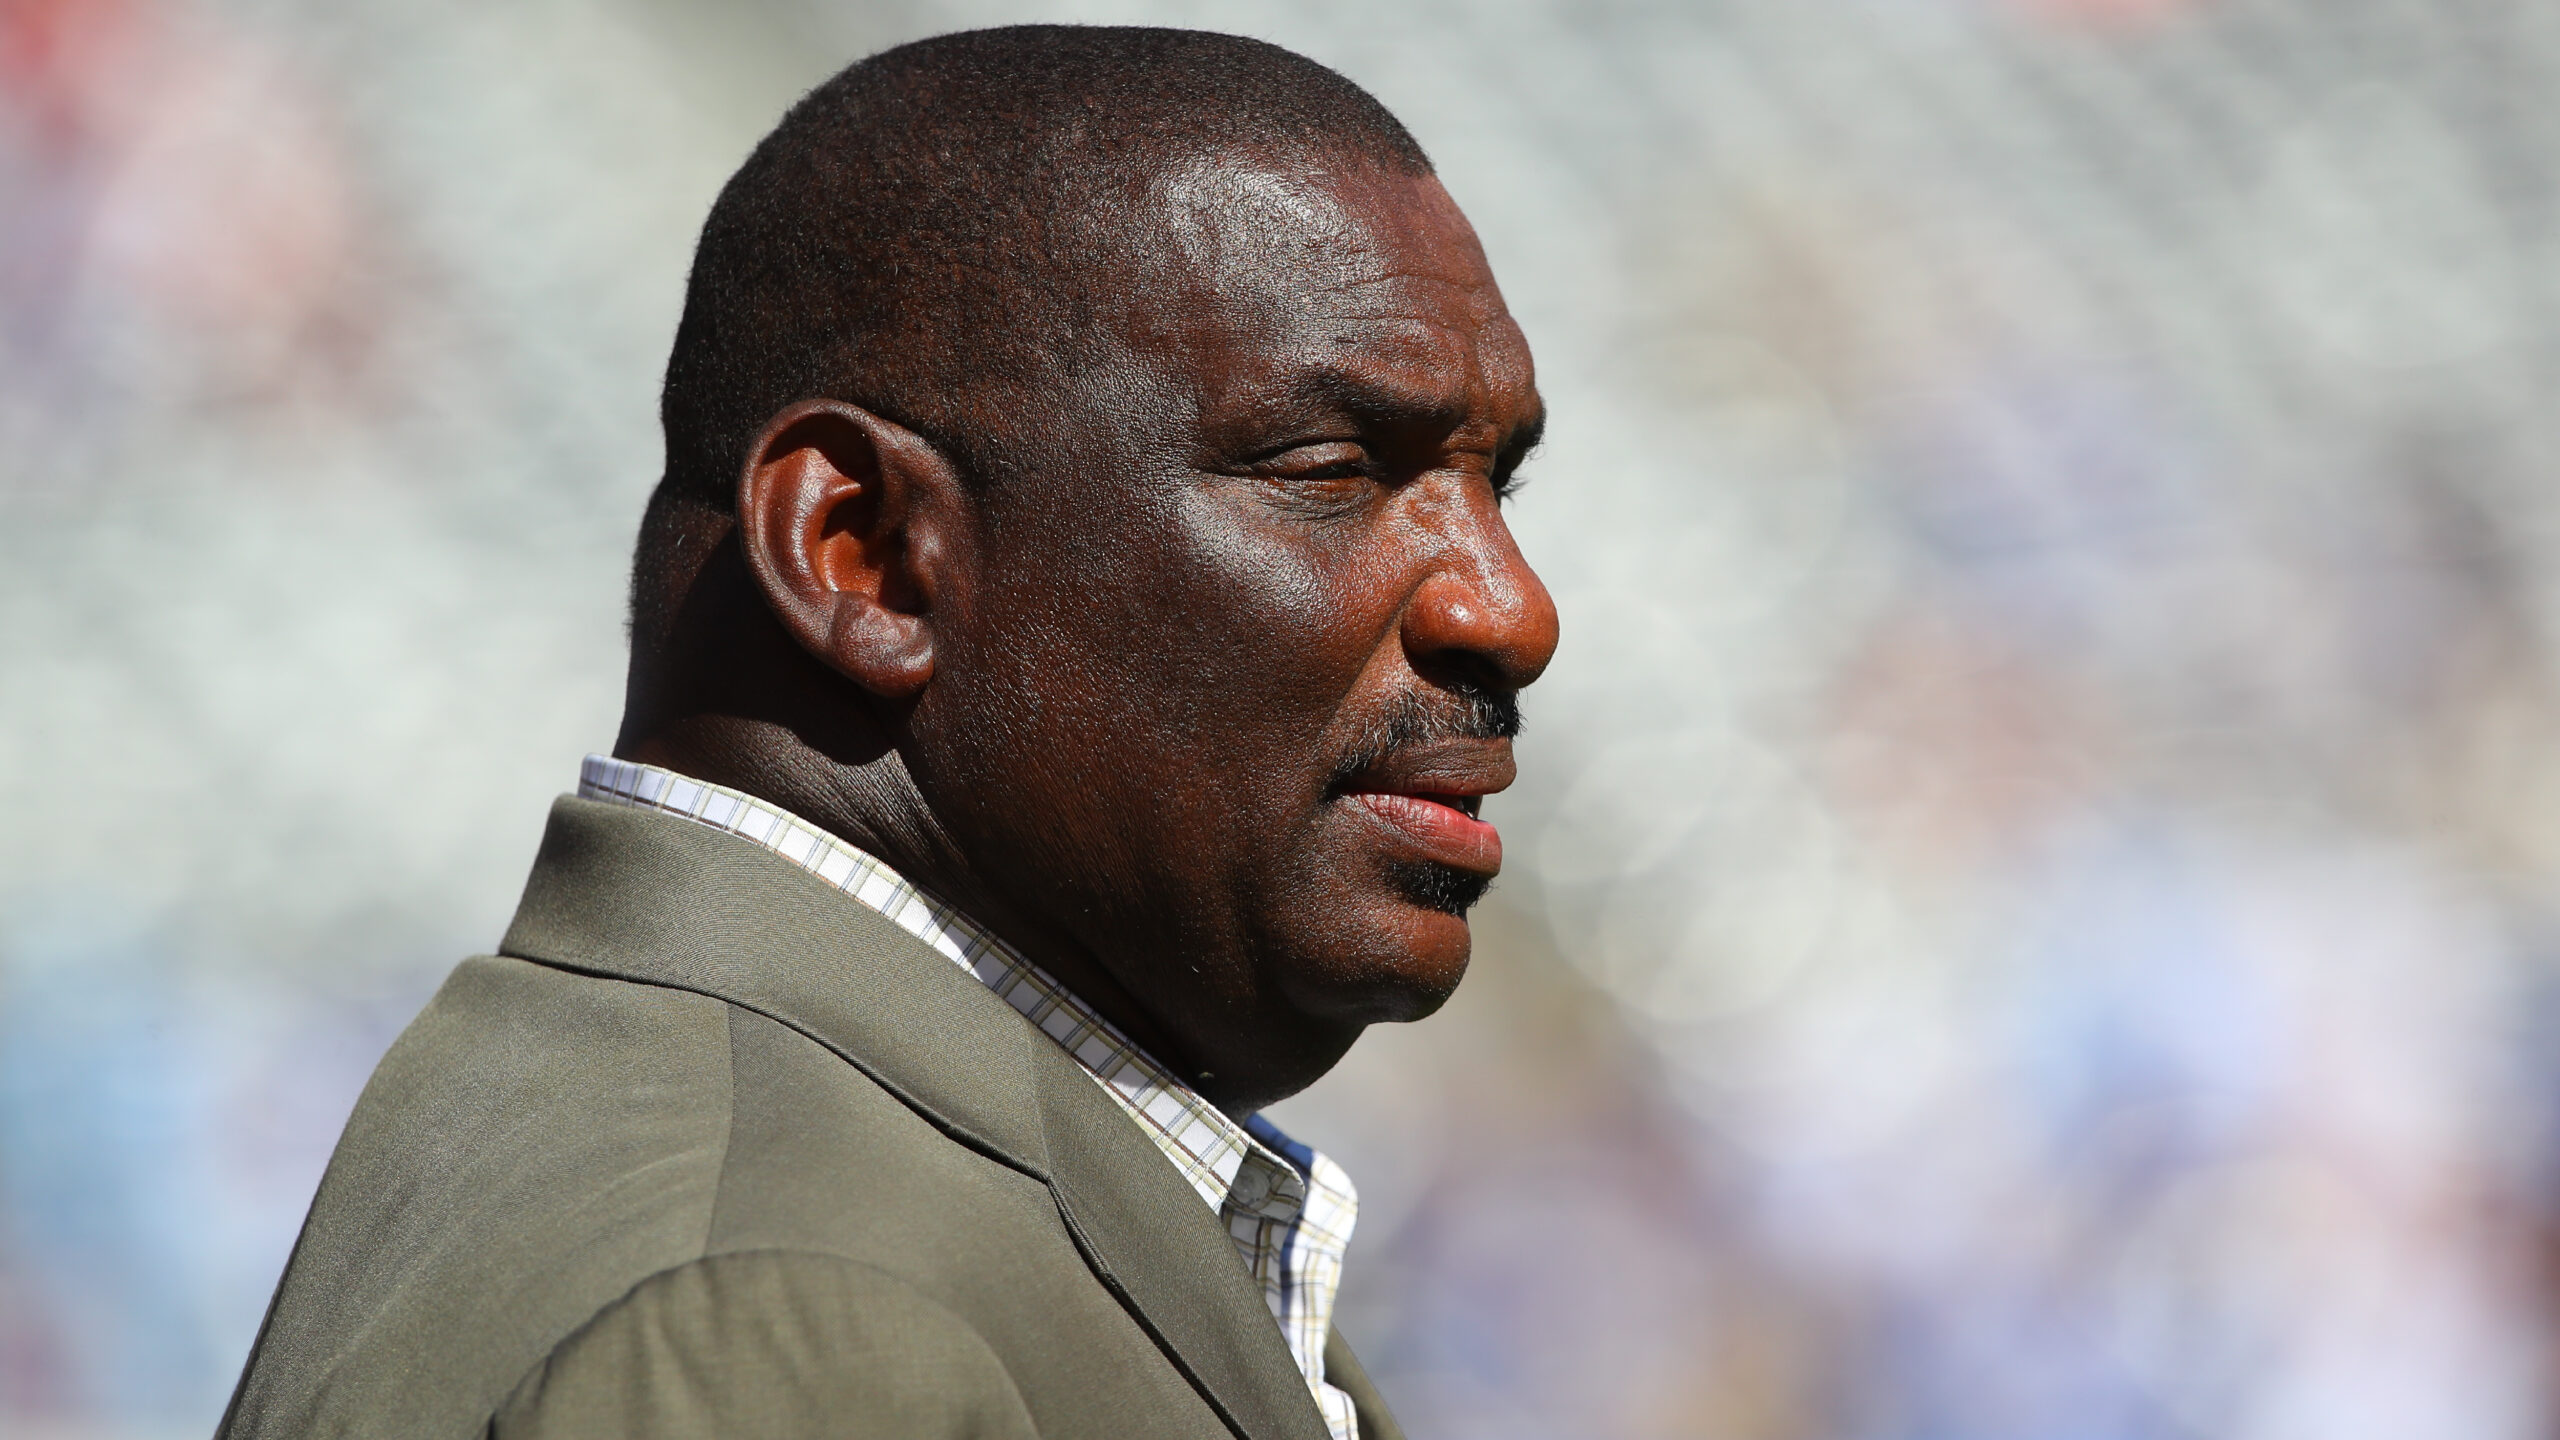 EAST RUTHERFORD, NJ - SEPTEMBER 29: Former Washington Football Team quarterback Doug Williams prior to the National Football League game between the New York Giants and the Washington Football Team on September 29, 2019 at MetLife Stadium in East Rutherford, NJ. (Photo by Rich Graessle/Icon Sportswire via Getty Images)